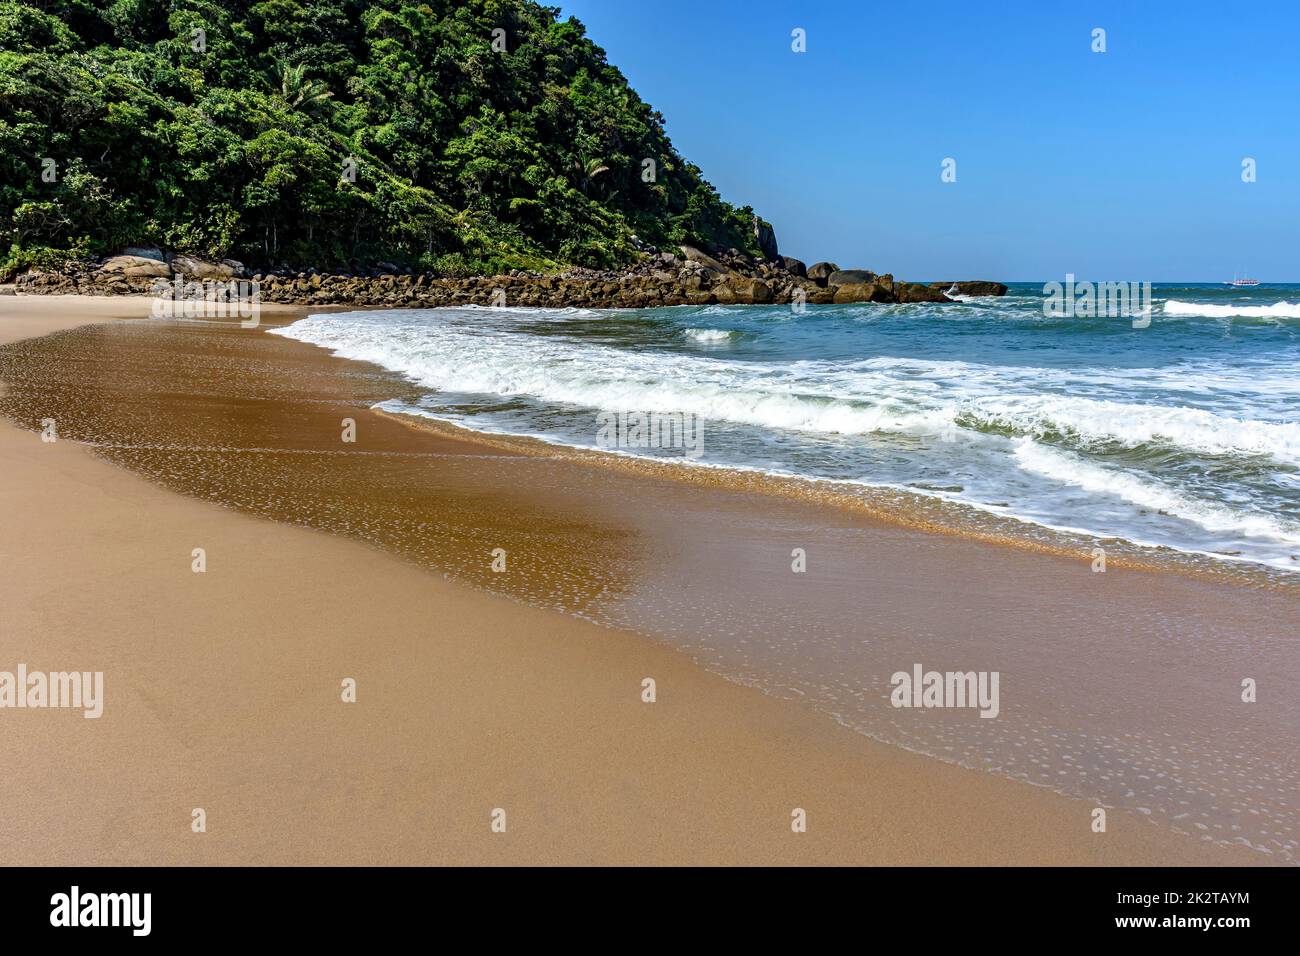 Paradisiacal rocky beach with clean and calm waters surrounded by forest and hills Stock Photo